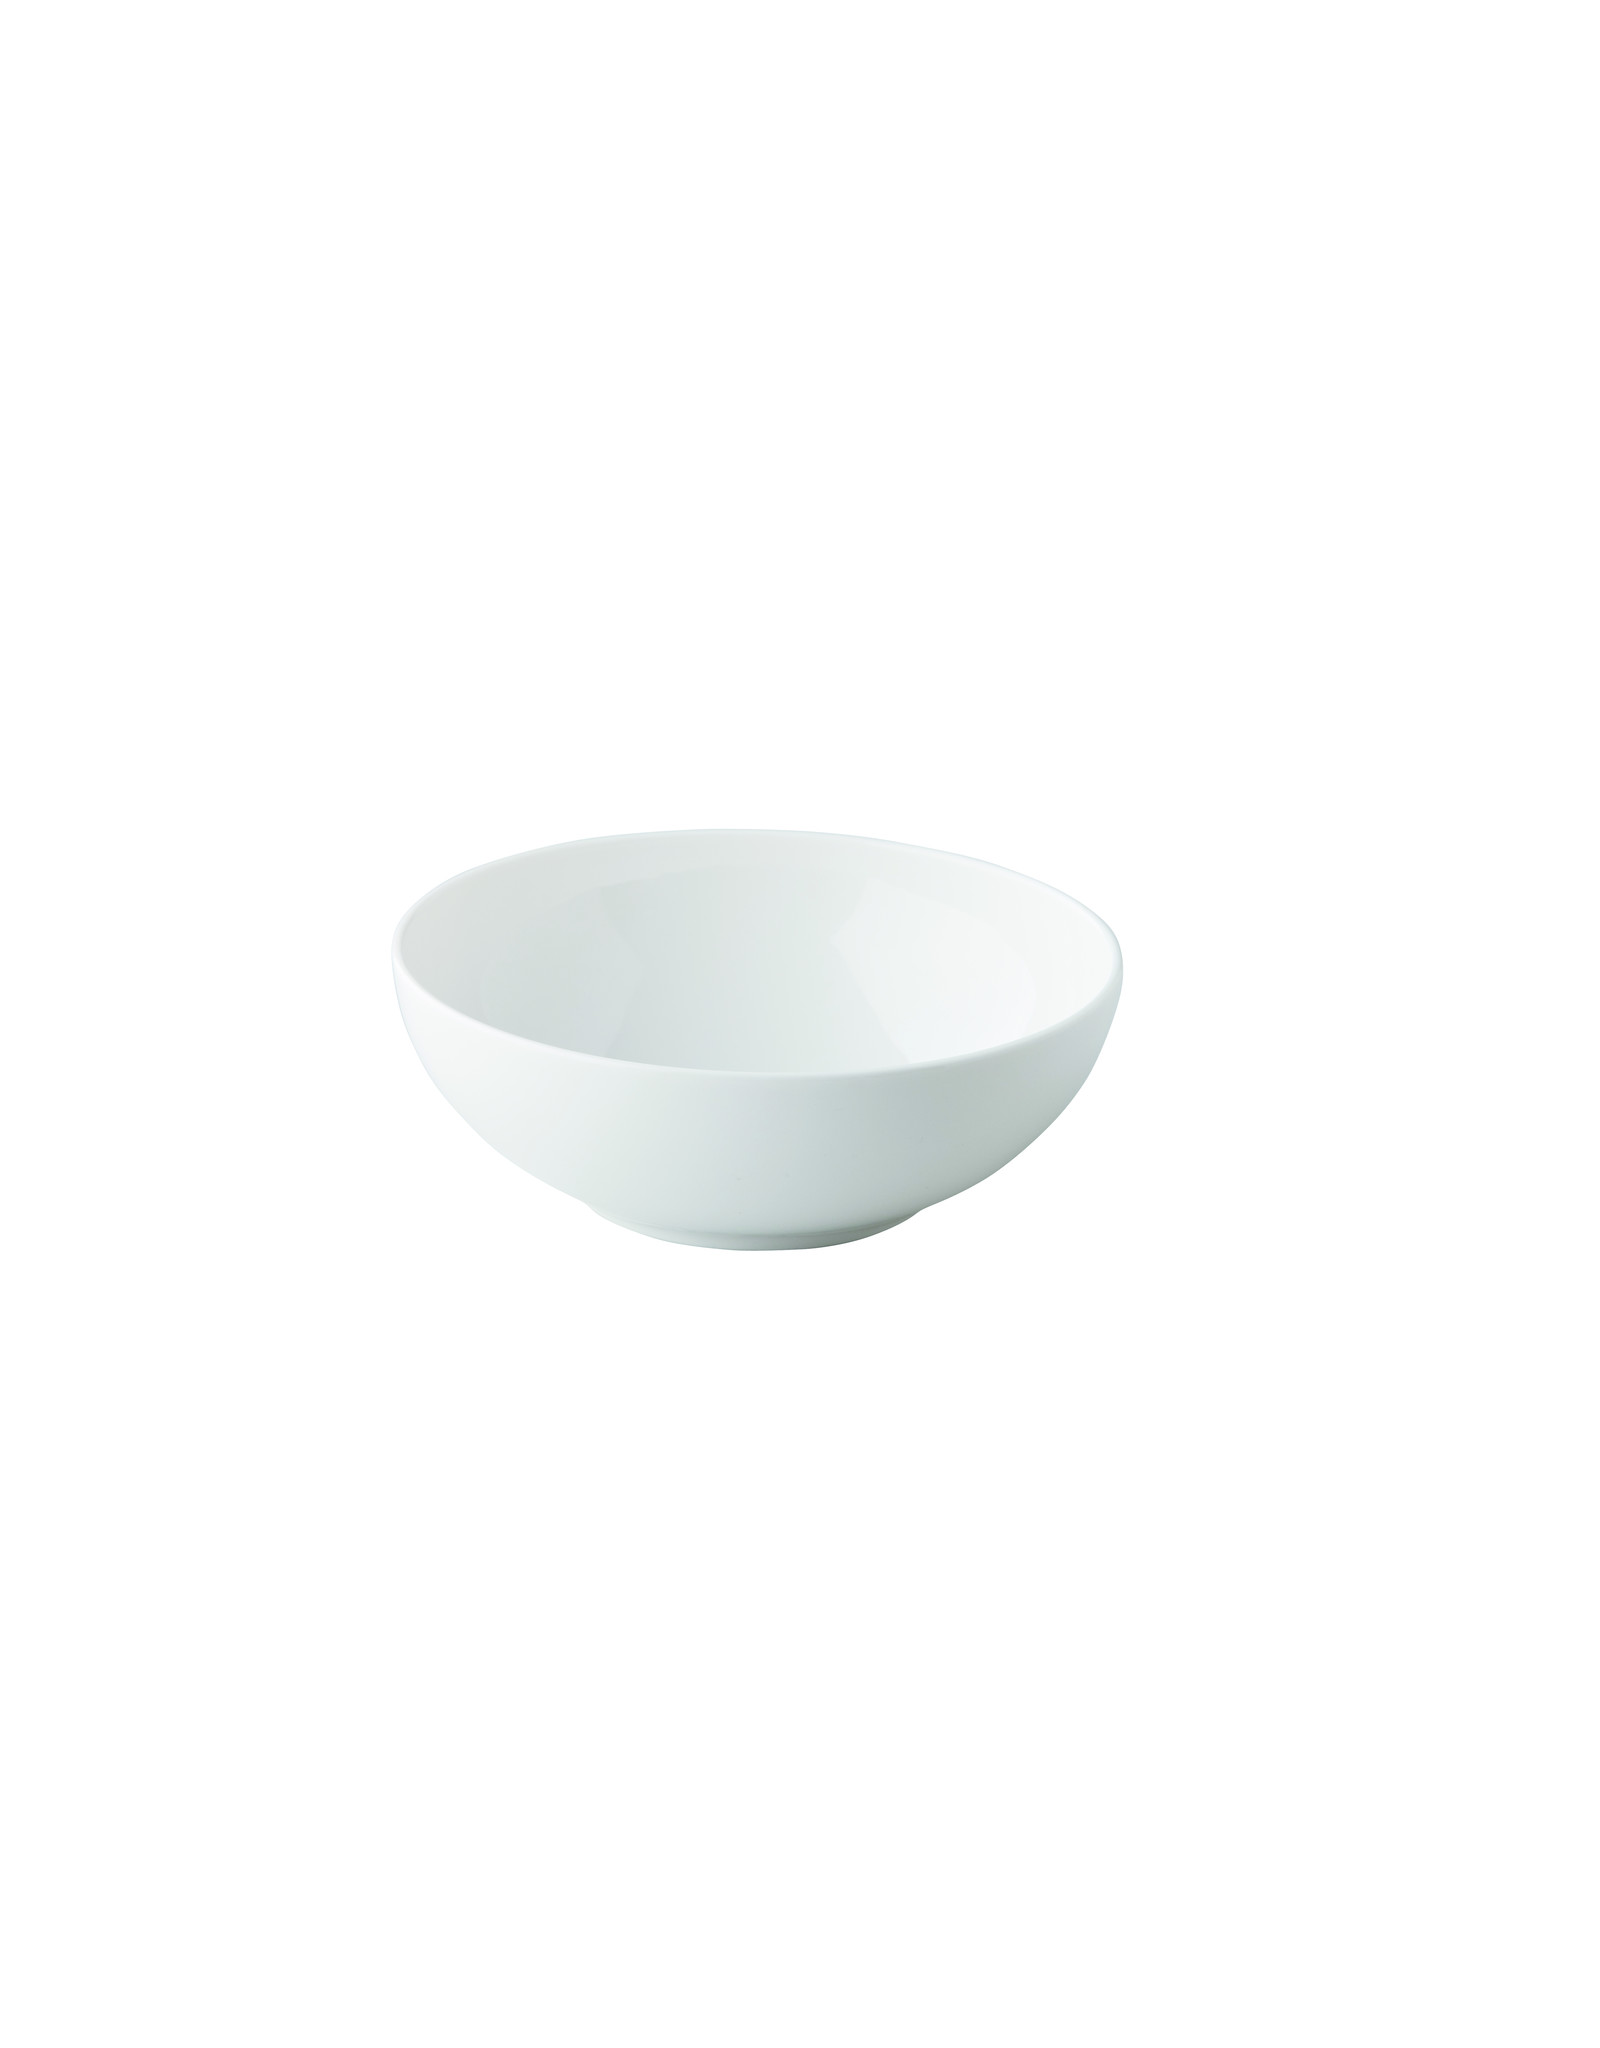 Stylepoint Q Fine China coupe bowl 14,6 cm